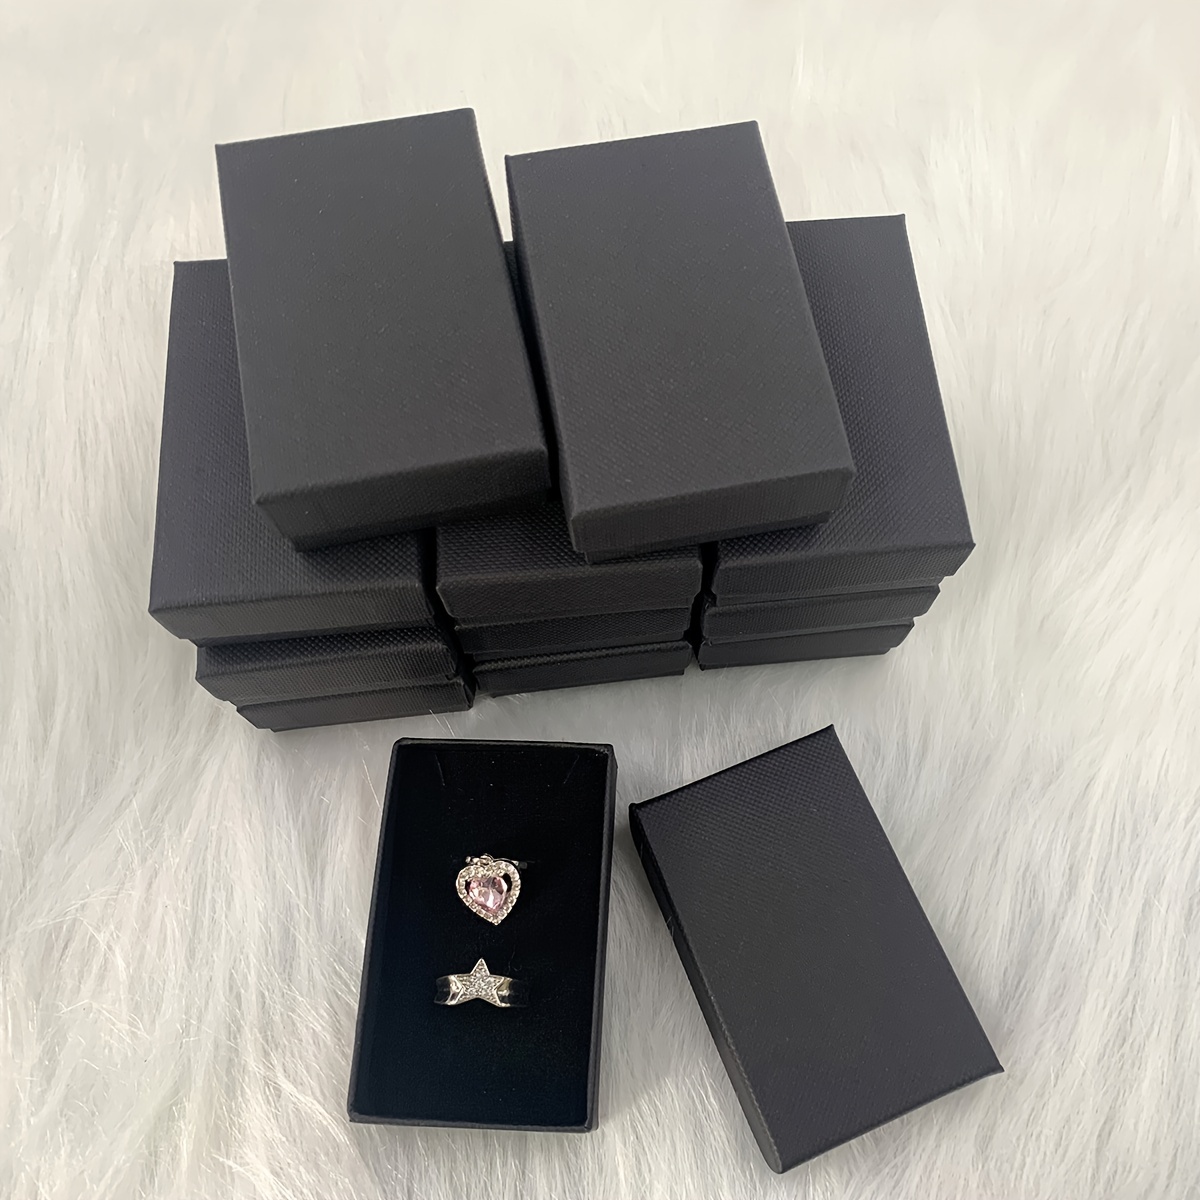 12pcs/pack, New Jewelry Box Packaging Jewelry Box Ring Necklace Ear  Jewelry, Cheapest Items Available, , Small Business Supplies, Packaging  Box, Weddi